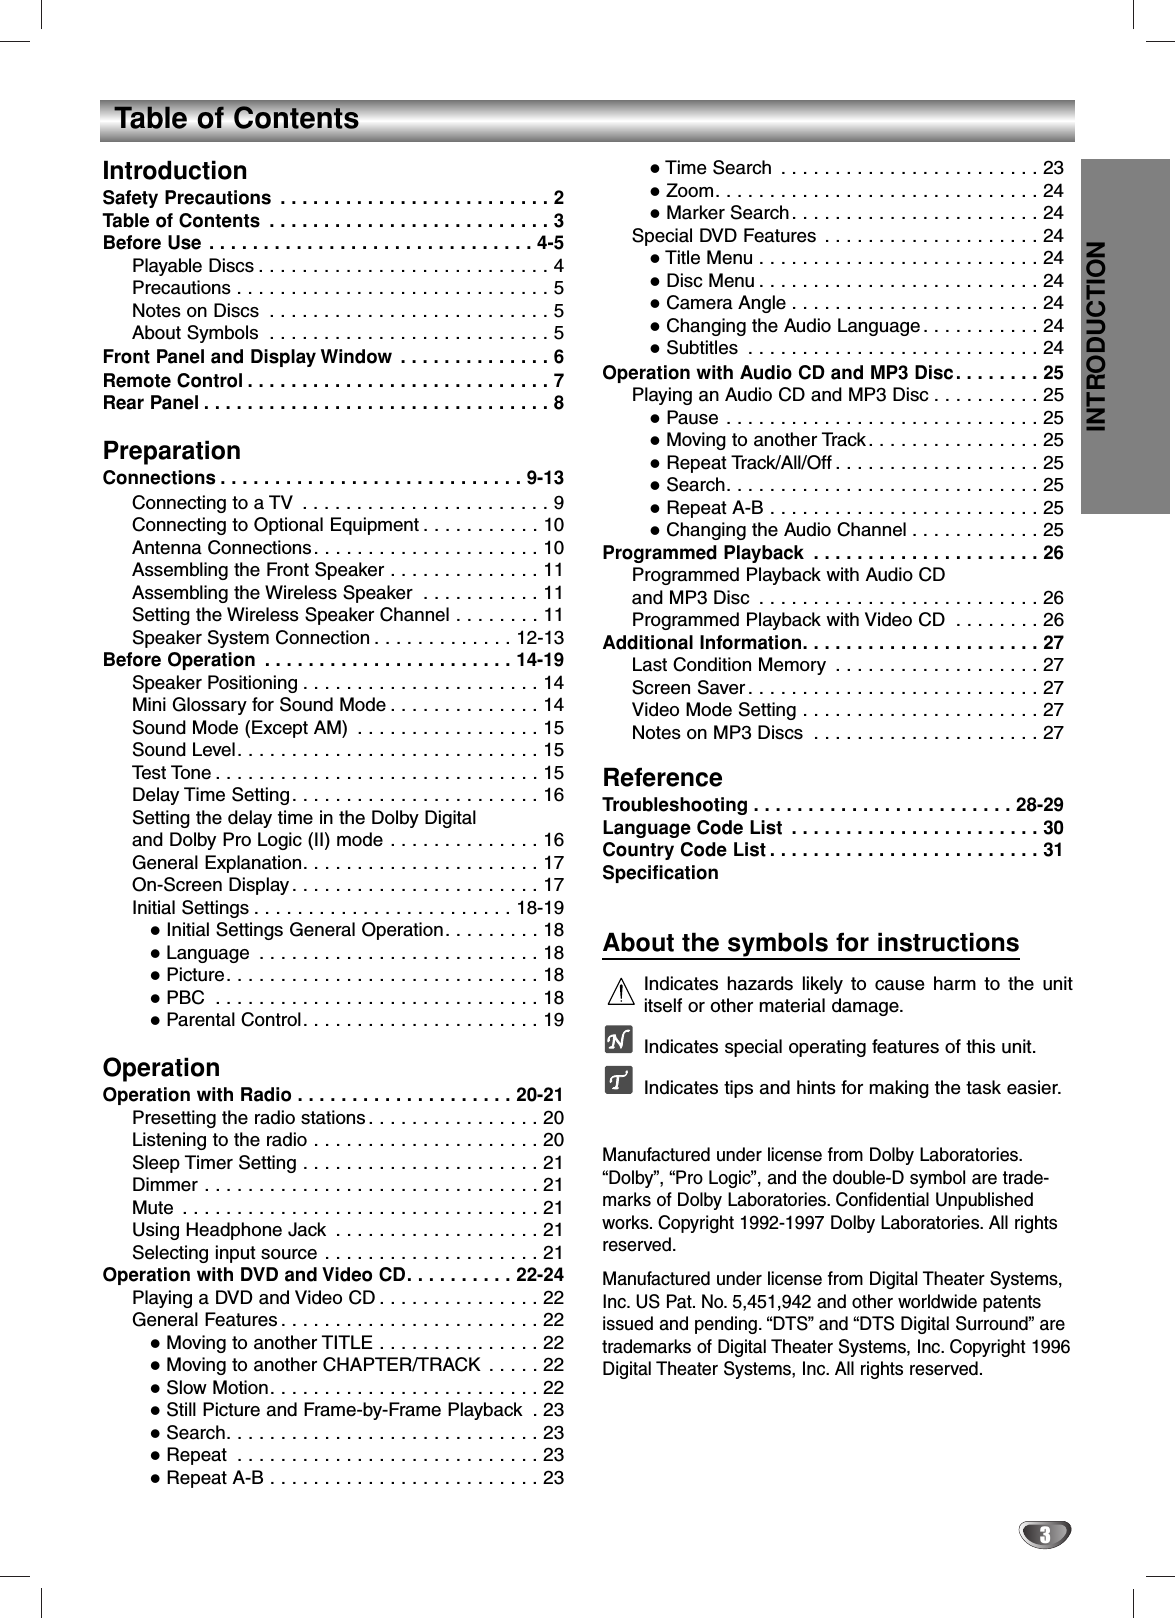 INTRODUCTION3Table of ContentsIntroductionSafety Precautions . . . . . . . . . . . . . . . . . . . . . . . . . 2Table of Contents . . . . . . . . . . . . . . . . . . . . . . . . . . 3Before Use . . . . . . . . . . . . . . . . . . . . . . . . . . . . . . 4-5Playable Discs . . . . . . . . . . . . . . . . . . . . . . . . . . . 4Precautions . . . . . . . . . . . . . . . . . . . . . . . . . . . . . 5Notes on Discs . . . . . . . . . . . . . . . . . . . . . . . . . . 5About Symbols . . . . . . . . . . . . . . . . . . . . . . . . . . 5Front Panel and Display Window . . . . . . . . . . . . . . 6Remote Control . . . . . . . . . . . . . . . . . . . . . . . . . . . . 7Rear Panel . . . . . . . . . . . . . . . . . . . . . . . . . . . . . . . . 8PreparationConnections . . . . . . . . . . . . . . . . . . . . . . . . . . . . 9-13Connecting to a TV  . . . . . . . . . . . . . . . . . . . . . . . 9Connecting to Optional Equipment . . . . . . . . . . . 10Antenna Connections. . . . . . . . . . . . . . . . . . . . . 10Assembling the Front Speaker . . . . . . . . . . . . . . 11Assembling the Wireless Speaker . . . . . . . . . . . 11Setting the Wireless Speaker Channel . . . . . . . . 11Speaker System Connection . . . . . . . . . . . . . 12-13Before Operation . . . . . . . . . . . . . . . . . . . . . . . 14-19Speaker Positioning . . . . . . . . . . . . . . . . . . . . . . 14Mini Glossary for Sound Mode . . . . . . . . . . . . . . 14Sound Mode (Except AM) . . . . . . . . . . . . . . . . . 15Sound Level. . . . . . . . . . . . . . . . . . . . . . . . . . . . 15Test Tone . . . . . . . . . . . . . . . . . . . . . . . . . . . . . . 15Delay Time Setting. . . . . . . . . . . . . . . . . . . . . . . 16Setting the delay time in the Dolby Digital and Dolby Pro Logic (II) mode . . . . . . . . . . . . . . 16General Explanation. . . . . . . . . . . . . . . . . . . . . . 17On-Screen Display . . . . . . . . . . . . . . . . . . . . . . . 17Initial Settings . . . . . . . . . . . . . . . . . . . . . . . . 18-19Initial Settings General Operation. . . . . . . . . 18Language . . . . . . . . . . . . . . . . . . . . . . . . . . 18Picture. . . . . . . . . . . . . . . . . . . . . . . . . . . . . 18PBC . . . . . . . . . . . . . . . . . . . . . . . . . . . . . . 18Parental Control. . . . . . . . . . . . . . . . . . . . . . 19OperationOperation with Radio . . . . . . . . . . . . . . . . . . . . 20-21Presetting the radio stations . . . . . . . . . . . . . . . . 20Listening to the radio . . . . . . . . . . . . . . . . . . . . . 20Sleep Timer Setting . . . . . . . . . . . . . . . . . . . . . . 21Dimmer . . . . . . . . . . . . . . . . . . . . . . . . . . . . . . . 21Mute . . . . . . . . . . . . . . . . . . . . . . . . . . . . . . . . . 21Using Headphone Jack . . . . . . . . . . . . . . . . . . . 21Selecting input source . . . . . . . . . . . . . . . . . . . . 21Operation with DVD and Video CD. . . . . . . . . . 22-24Playing a DVD and Video CD . . . . . . . . . . . . . . . 22General Features . . . . . . . . . . . . . . . . . . . . . . . . 22Moving to another TITLE . . . . . . . . . . . . . . . 22Moving to another CHAPTER/TRACK . . . . . 22Slow Motion. . . . . . . . . . . . . . . . . . . . . . . . . 22Still Picture and Frame-by-Frame Playback . 23Search. . . . . . . . . . . . . . . . . . . . . . . . . . . . . 23Repeat . . . . . . . . . . . . . . . . . . . . . . . . . . . . 23Repeat A-B . . . . . . . . . . . . . . . . . . . . . . . . . 23Time Search . . . . . . . . . . . . . . . . . . . . . . . . 23Zoom. . . . . . . . . . . . . . . . . . . . . . . . . . . . . . 24Marker Search. . . . . . . . . . . . . . . . . . . . . . . 24Special DVD Features . . . . . . . . . . . . . . . . . . . . 24Title Menu . . . . . . . . . . . . . . . . . . . . . . . . . . 24Disc Menu . . . . . . . . . . . . . . . . . . . . . . . . . . 24Camera Angle . . . . . . . . . . . . . . . . . . . . . . . 24Changing the Audio Language . . . . . . . . . . . 24Subtitles . . . . . . . . . . . . . . . . . . . . . . . . . . . 24Operation with Audio CD and MP3 Disc. . . . . . . . 25Playing an Audio CD and MP3 Disc . . . . . . . . . . 25Pause . . . . . . . . . . . . . . . . . . . . . . . . . . . . . 25Moving to another Track. . . . . . . . . . . . . . . . 25Repeat Track/All/Off . . . . . . . . . . . . . . . . . . . 25Search. . . . . . . . . . . . . . . . . . . . . . . . . . . . . 25Repeat A-B . . . . . . . . . . . . . . . . . . . . . . . . . 25Changing the Audio Channel . . . . . . . . . . . . 25Programmed Playback . . . . . . . . . . . . . . . . . . . . . 26Programmed Playback with Audio CD and MP3 Disc . . . . . . . . . . . . . . . . . . . . . . . . . . 26Programmed Playback with Video CD . . . . . . . . 26Additional Information. . . . . . . . . . . . . . . . . . . . . . 27Last Condition Memory . . . . . . . . . . . . . . . . . . . 27Screen Saver . . . . . . . . . . . . . . . . . . . . . . . . . . . 27Video Mode Setting . . . . . . . . . . . . . . . . . . . . . . 27Notes on MP3 Discs . . . . . . . . . . . . . . . . . . . . . 27ReferenceTroubleshooting . . . . . . . . . . . . . . . . . . . . . . . . 28-29Language Code List . . . . . . . . . . . . . . . . . . . . . . . 30Country Code List . . . . . . . . . . . . . . . . . . . . . . . . . 31SpecificationAbout the symbols for instructionsIndicates hazards likely to cause harm to the unititself or other material damage.Indicates special operating features of this unit.Indicates tips and hints for making the task easier.Manufactured under license from Dolby Laboratories.“Dolby”, “Pro Logic”, and the double-D symbol are trade-marks of Dolby Laboratories. Confidential Unpublishedworks. Copyright 1992-1997 Dolby Laboratories. All rightsreserved.Manufactured under license from Digital Theater Systems,Inc. US Pat. No. 5,451,942 and other worldwide patentsissued and pending. “DTS”and “DTS Digital Surround”aretrademarks of Digital Theater Systems, Inc. Copyright 1996Digital Theater Systems, Inc. All rights reserved.